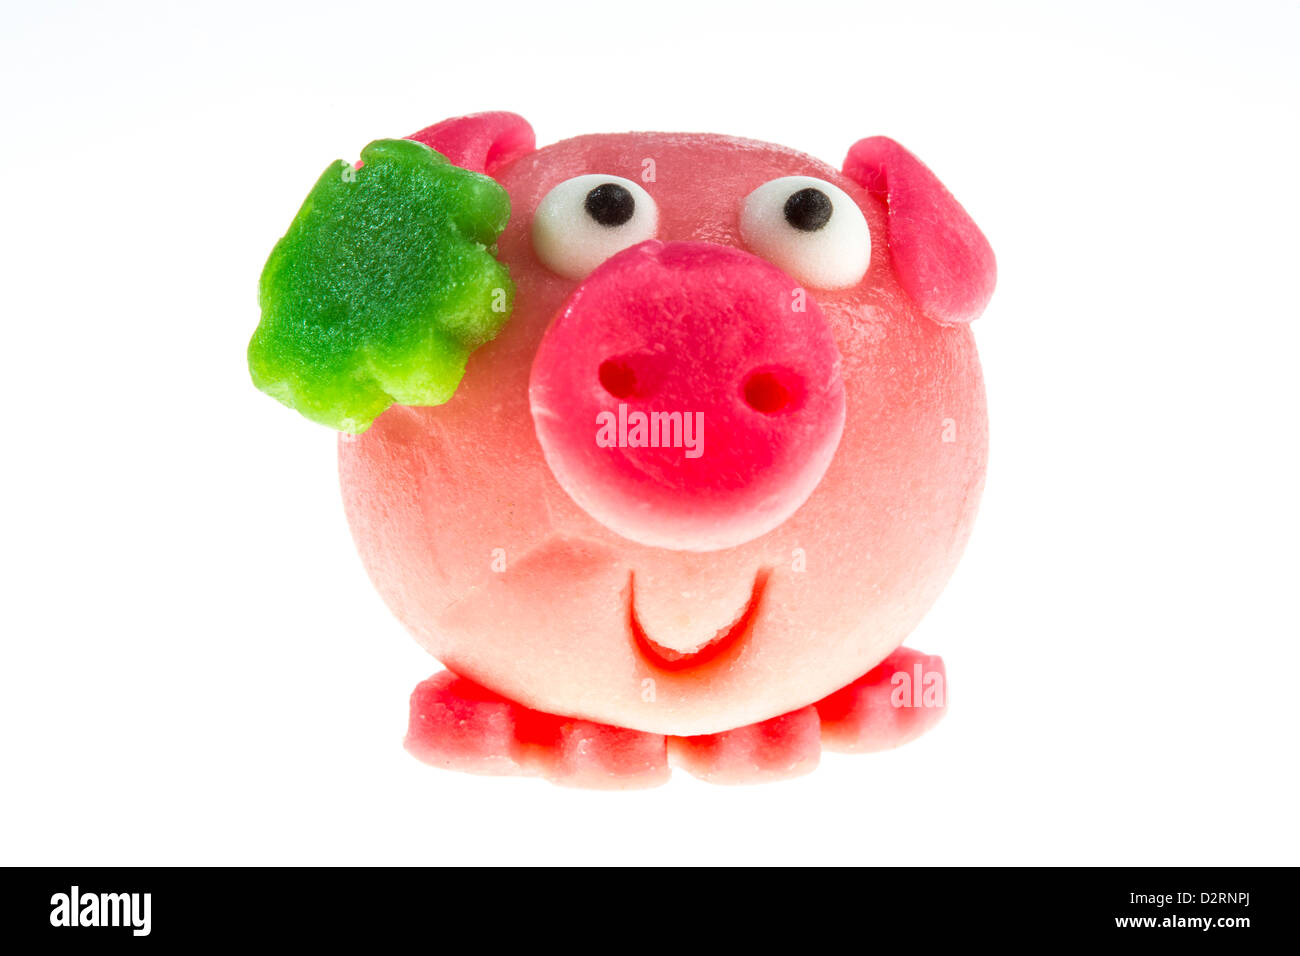 Little marzipan pigs, pork face, with shamrock, lucky charm symbol. Stock Photo